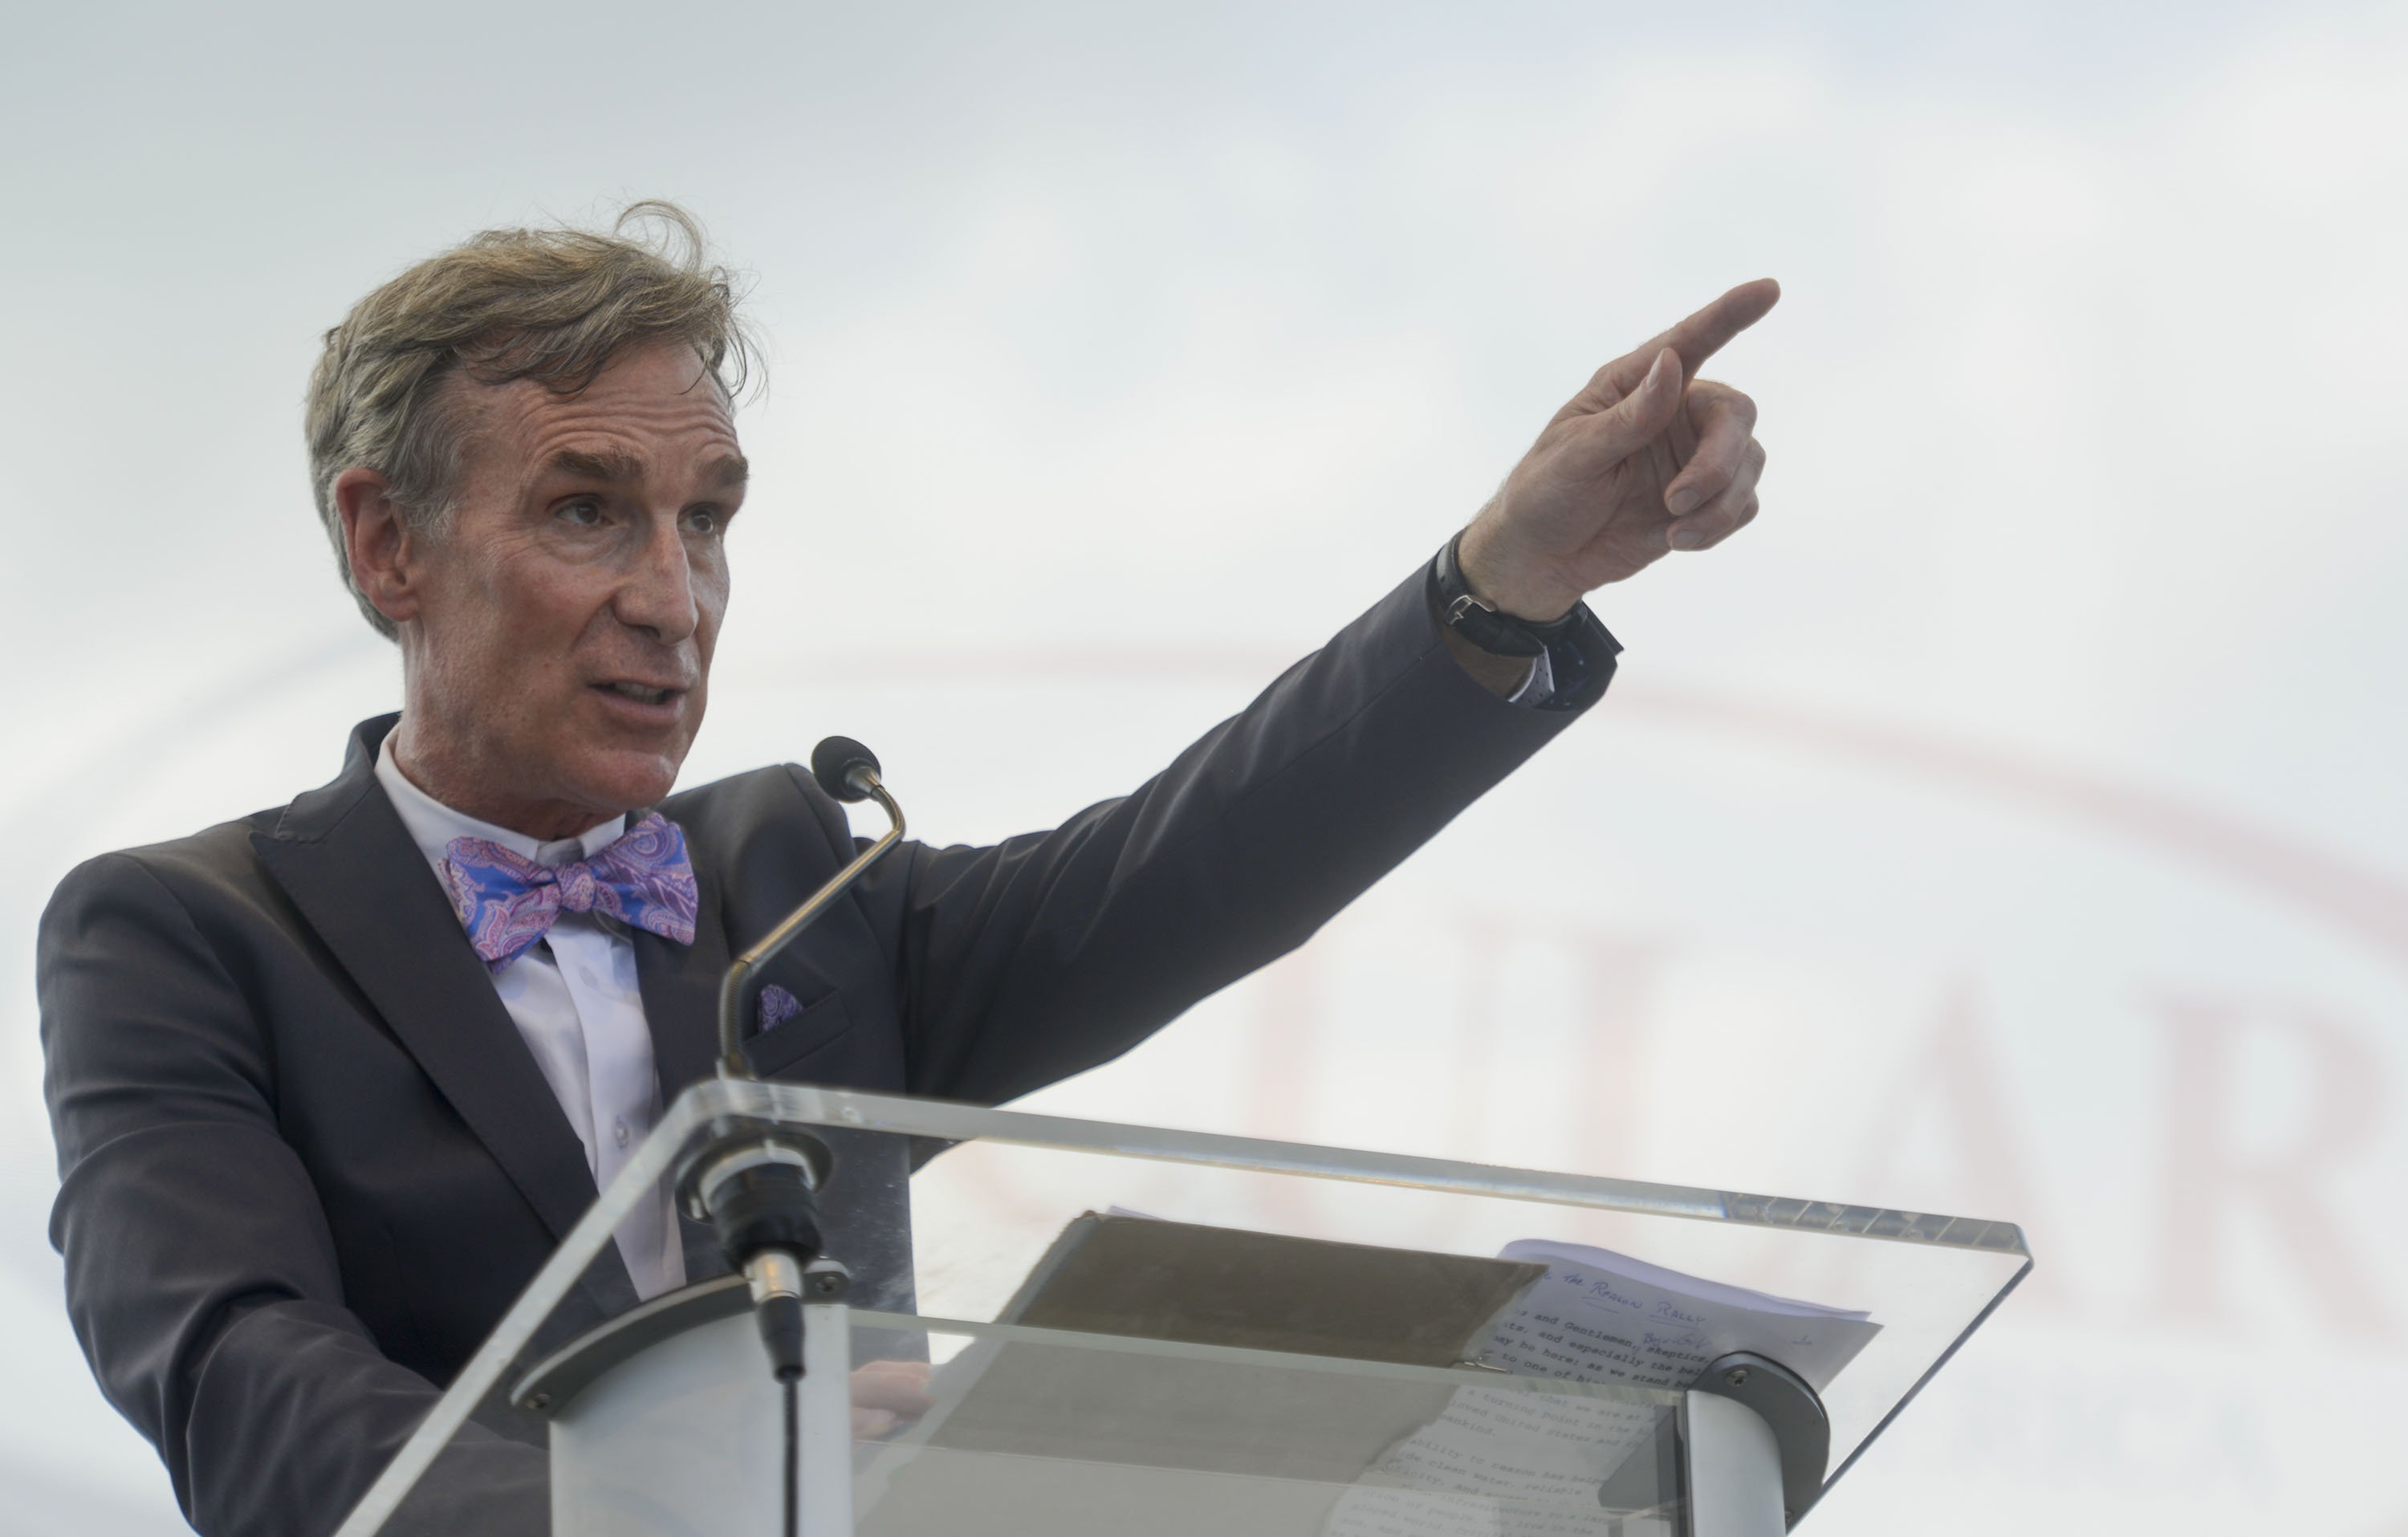 Comedian Bill Nye speaks during the Reason Rally at the Lincoln Memorial on June 4, 2016 in Washington, DC.  |  Source: Getty Images 